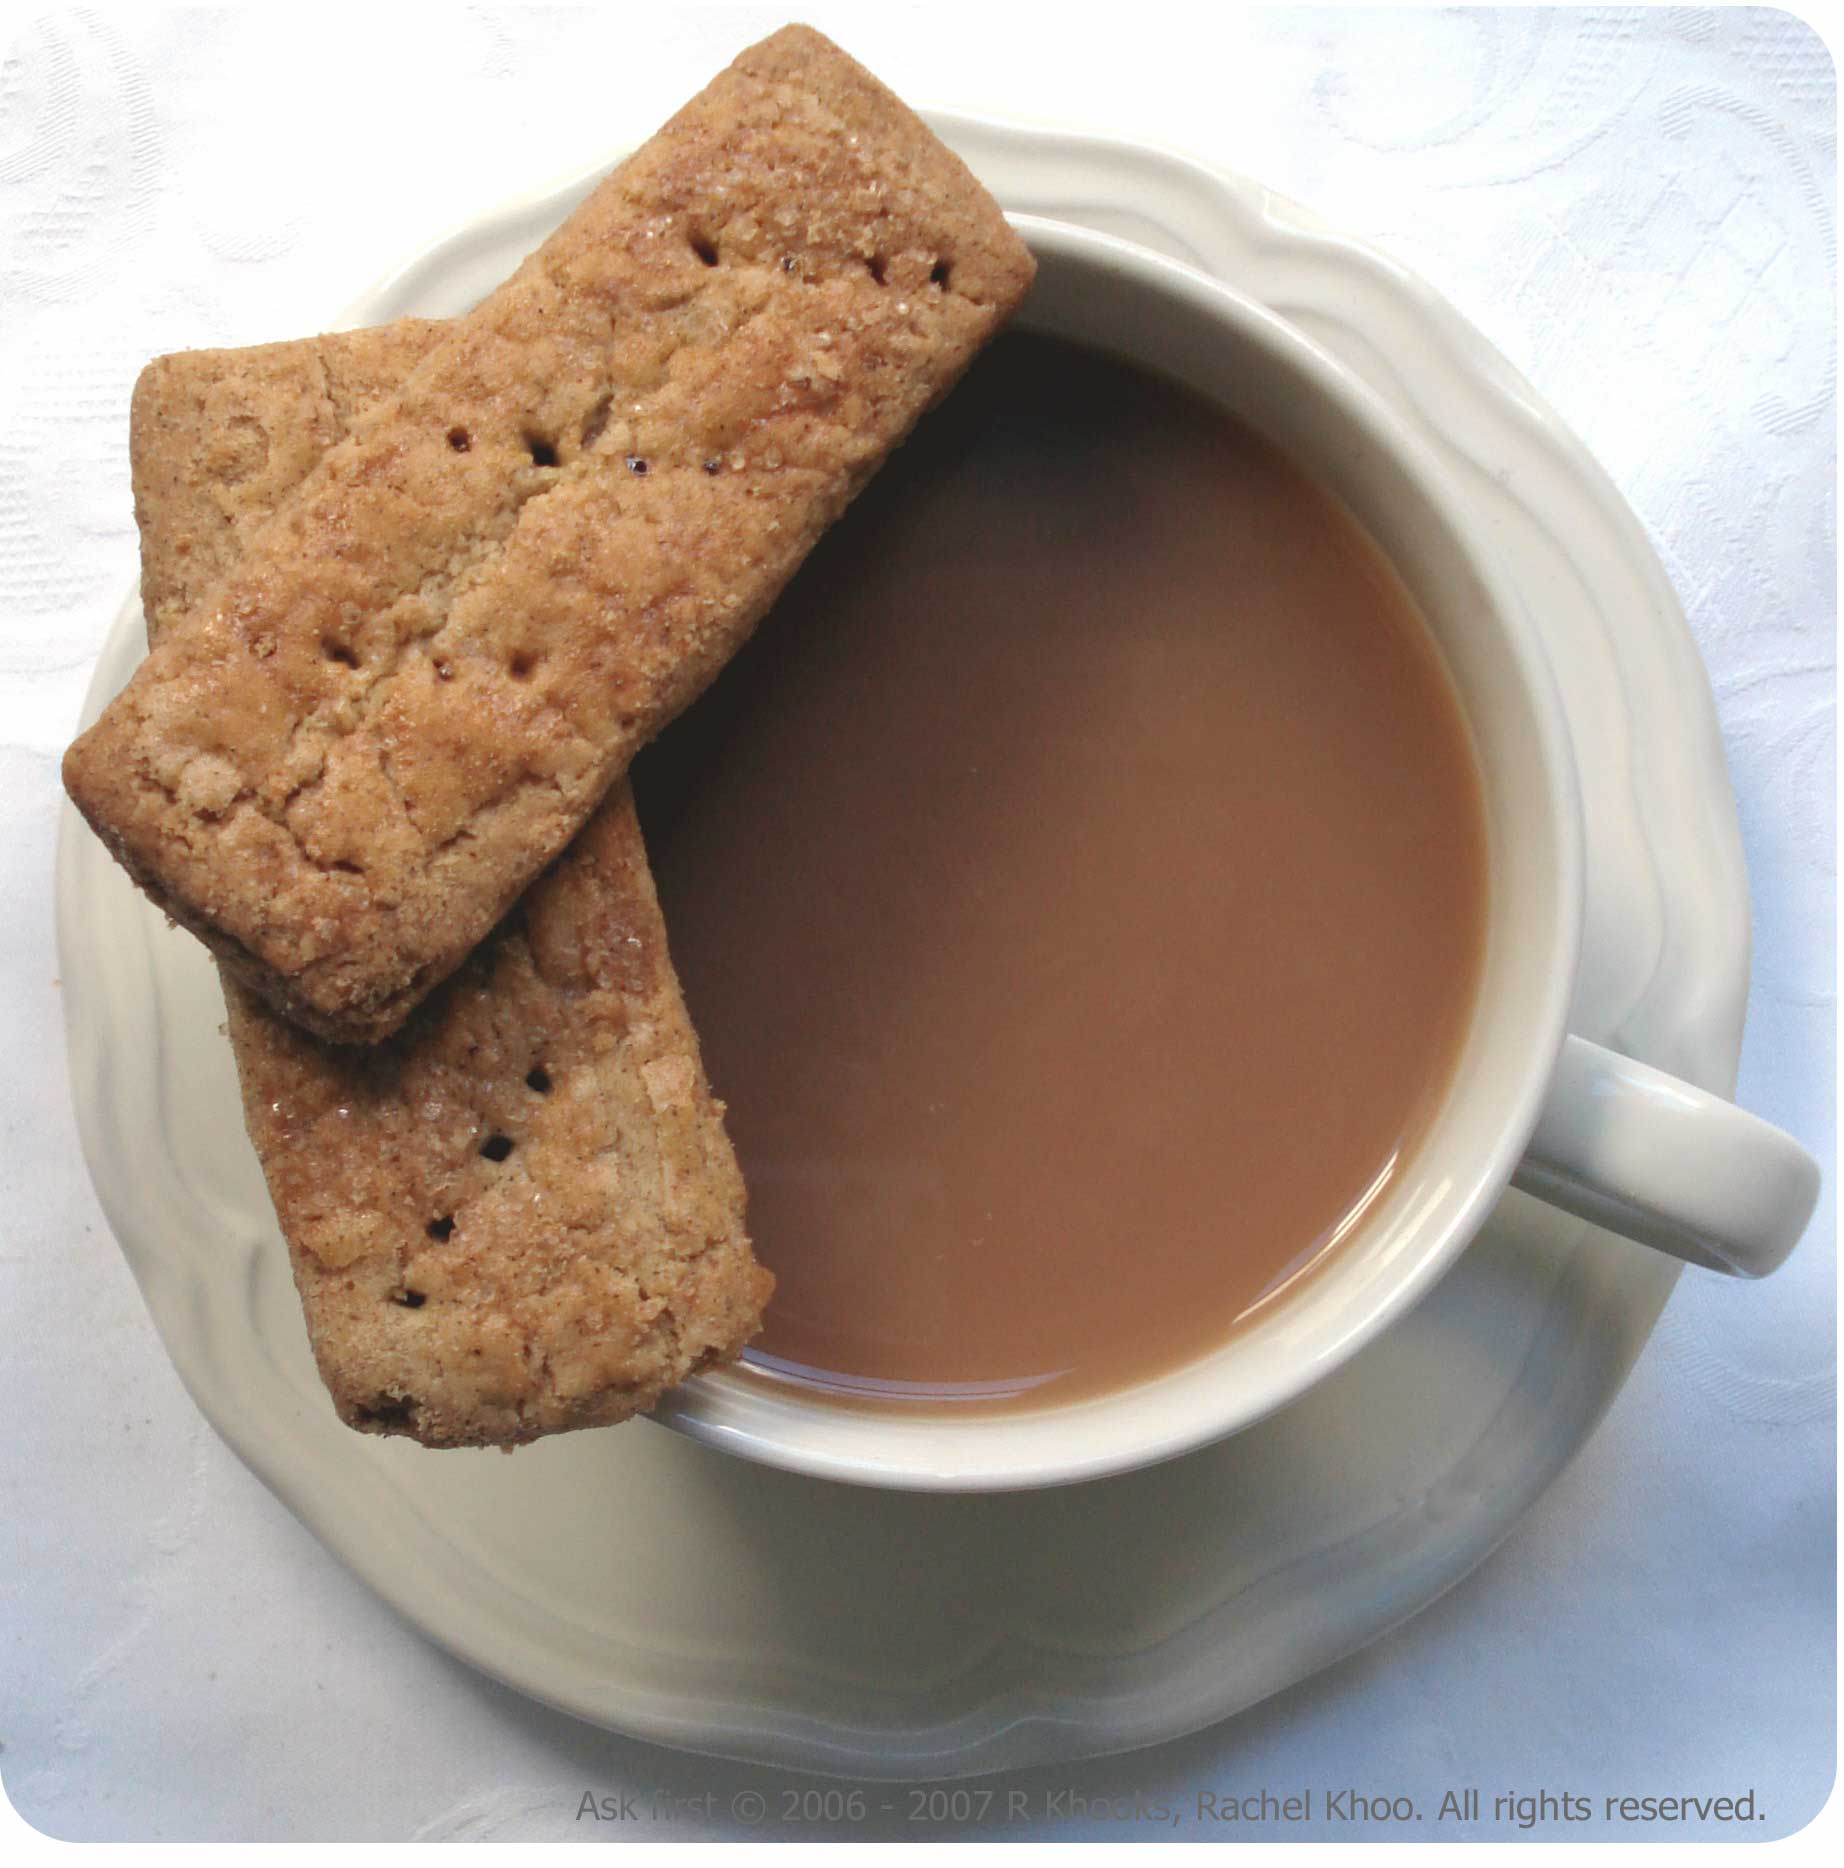 A nice cup of tea and a biscuit - Rachel Khoo